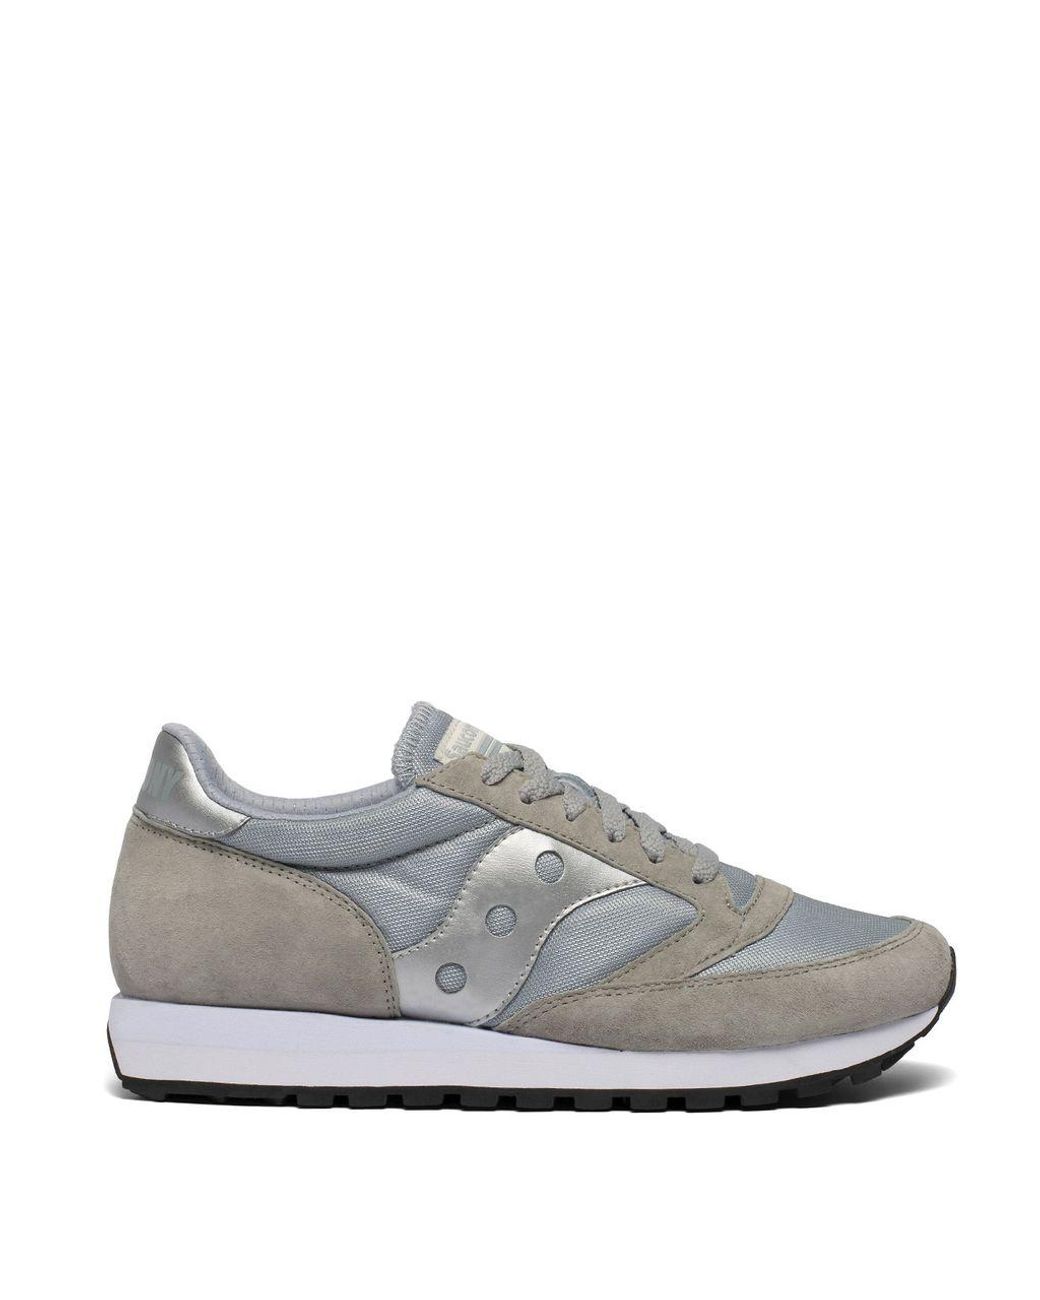 Saucony Suede Jazz 81 Trainers Grey / Silver in Gray for Men - Lyst